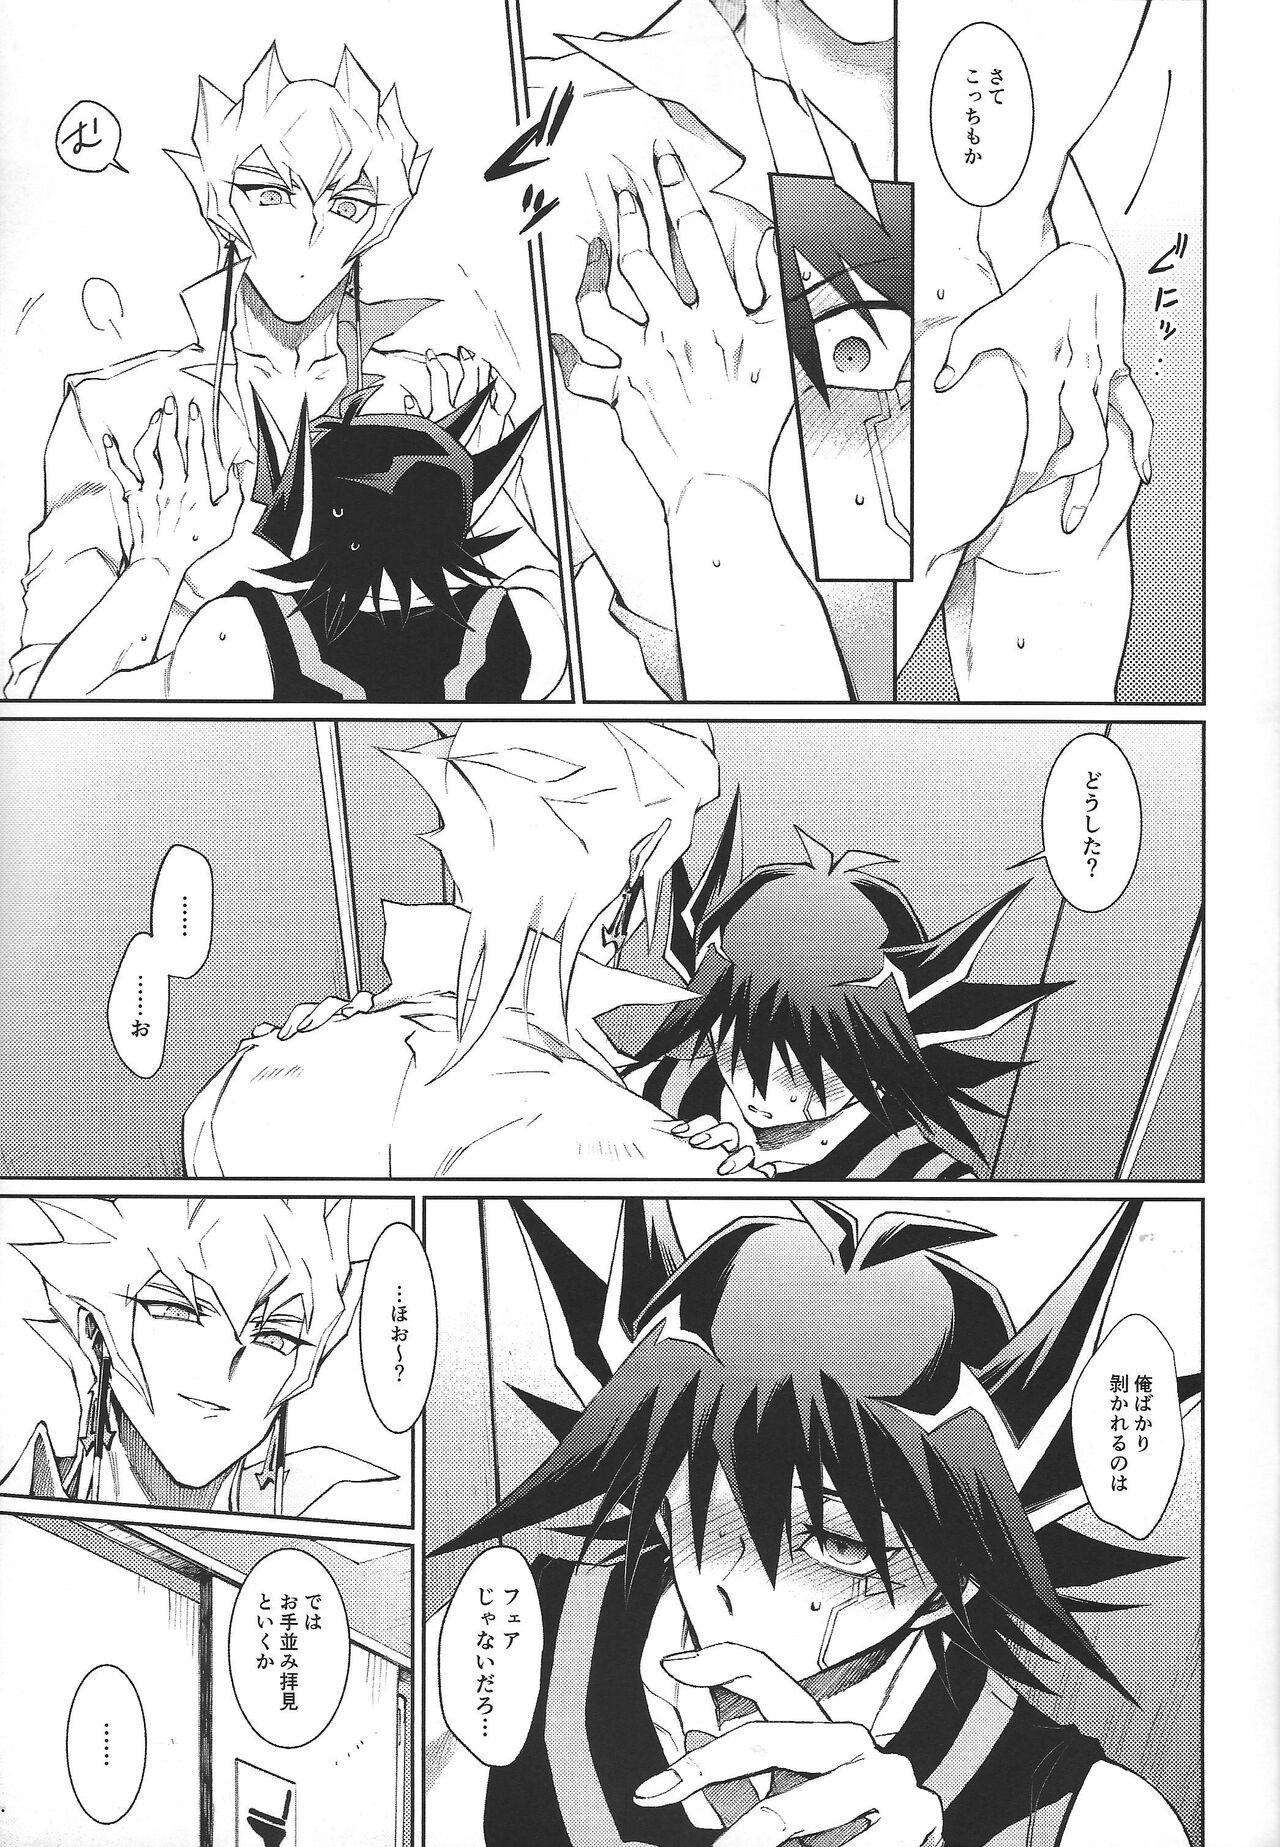 Amazing night mischief - Yu gi oh 5ds Candid - Page 12